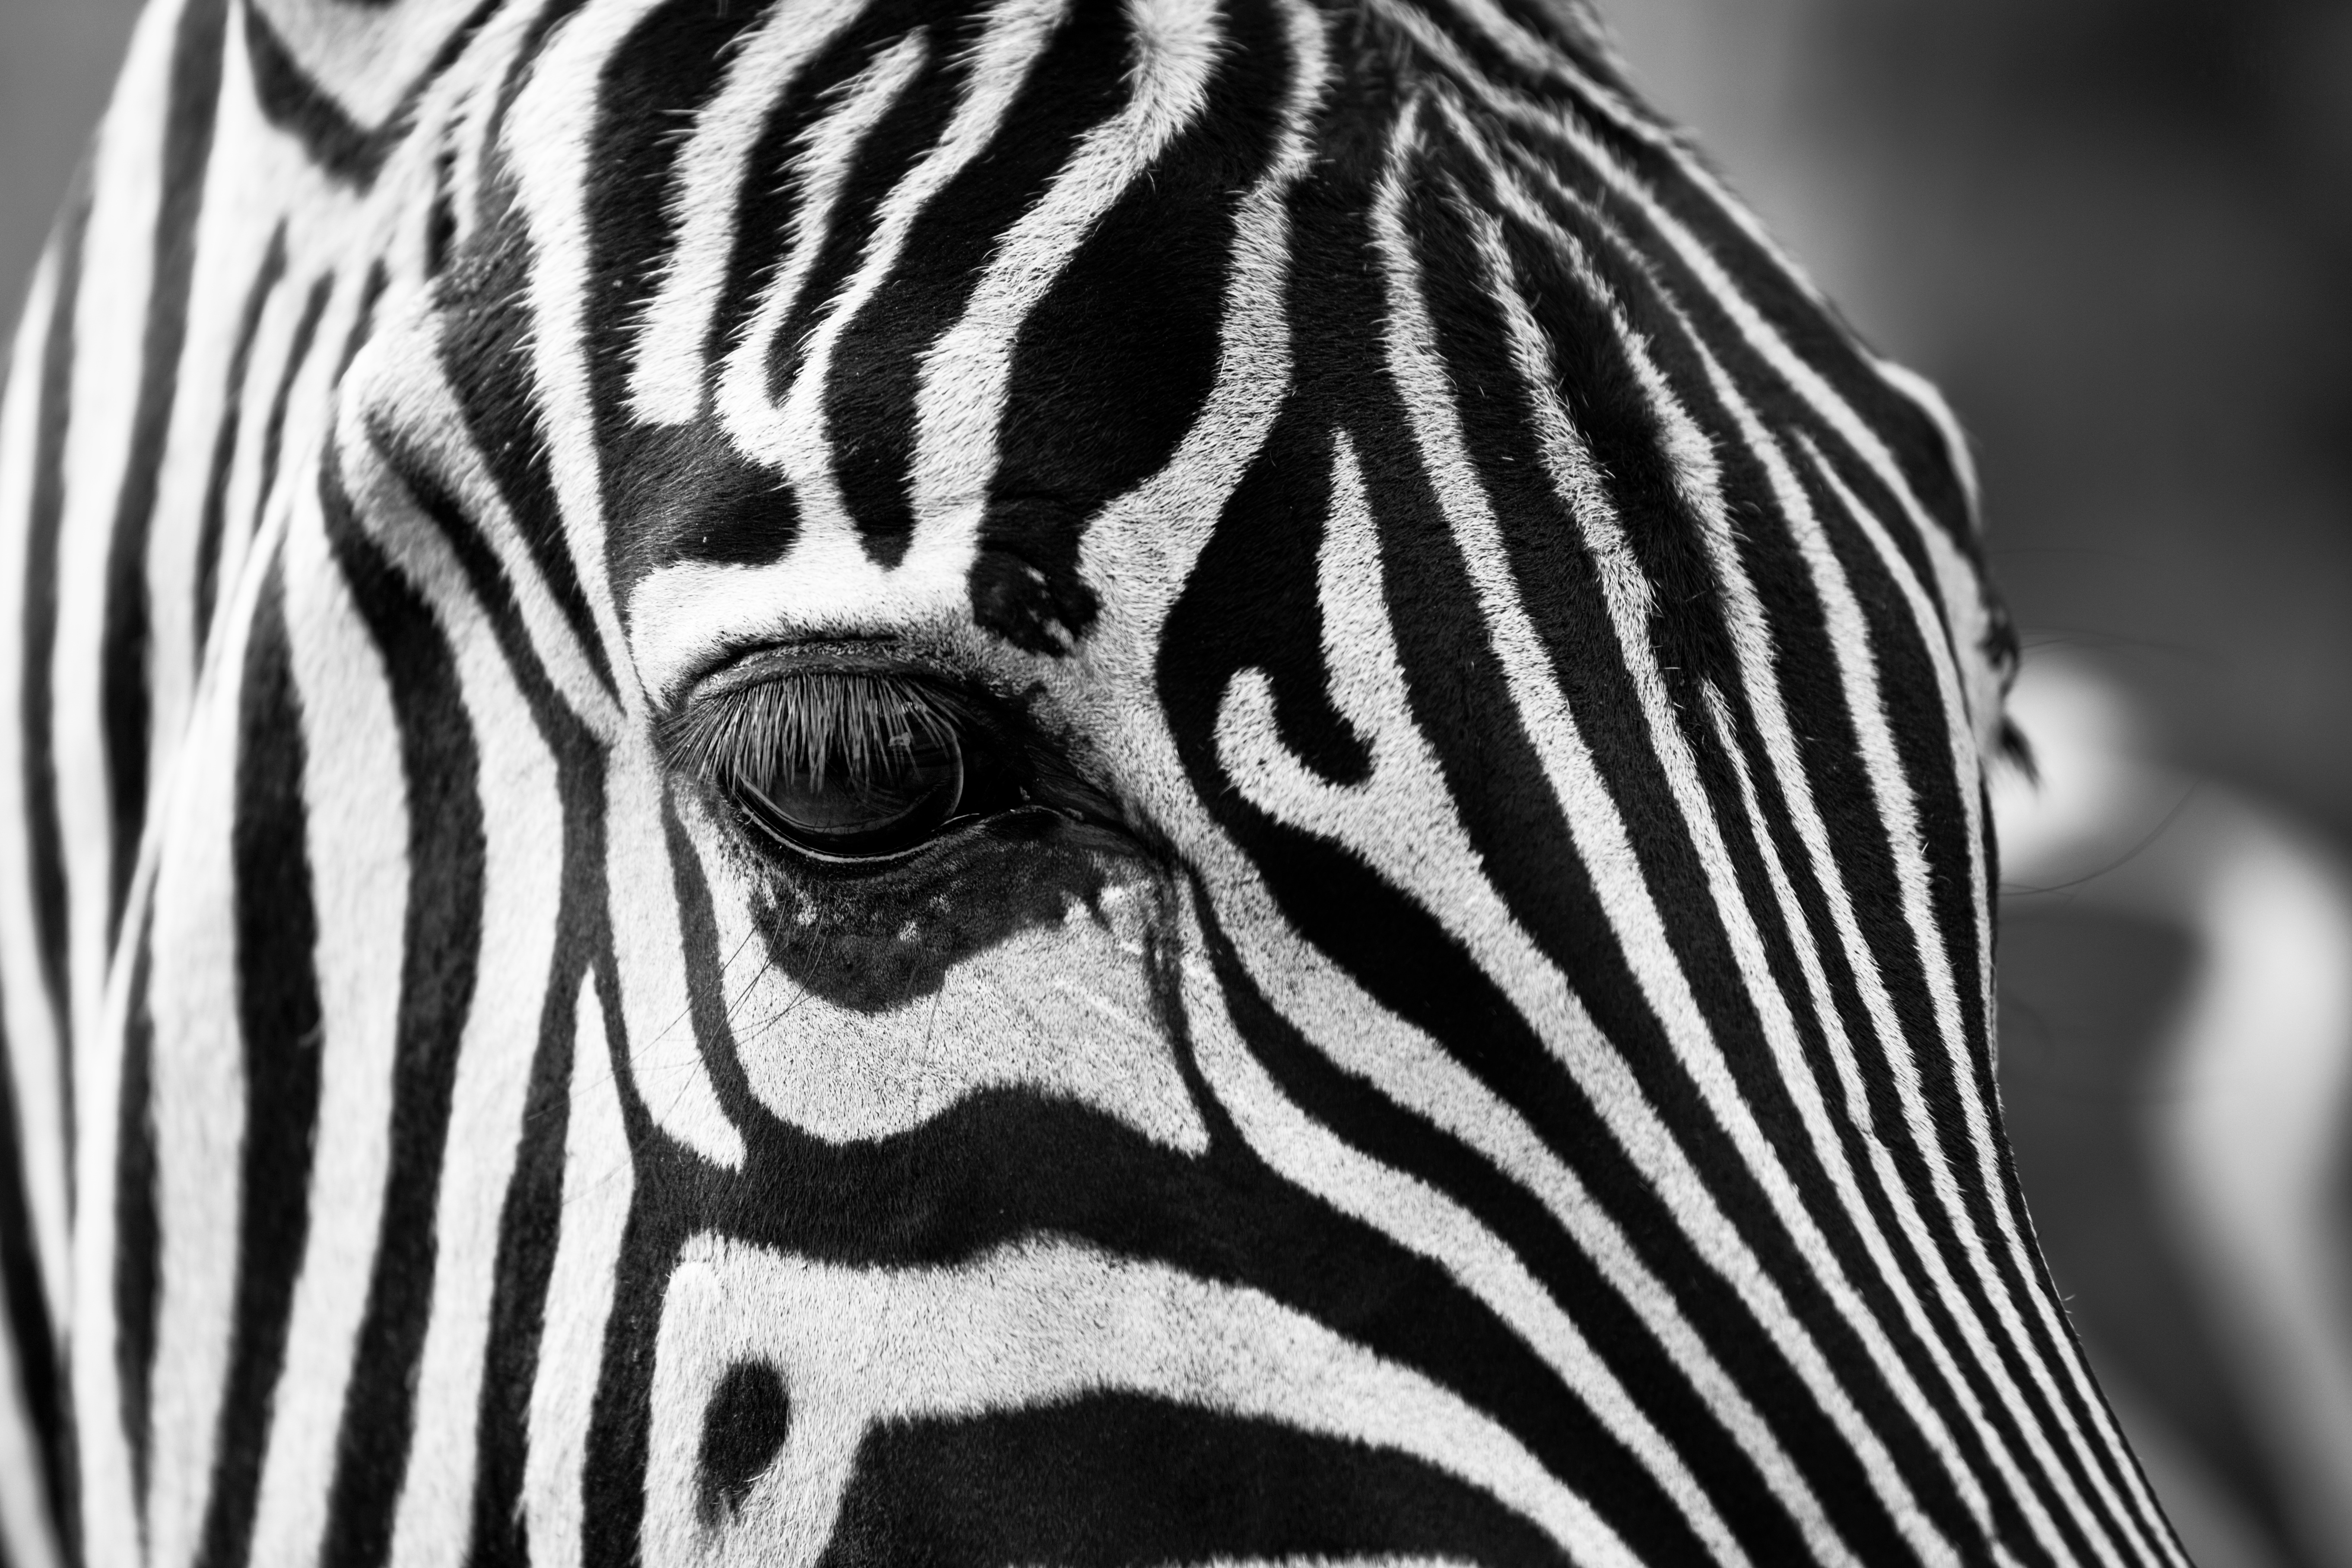 Zebra striping patterns are unique to each individual. Photo taken on November 1, 2014.